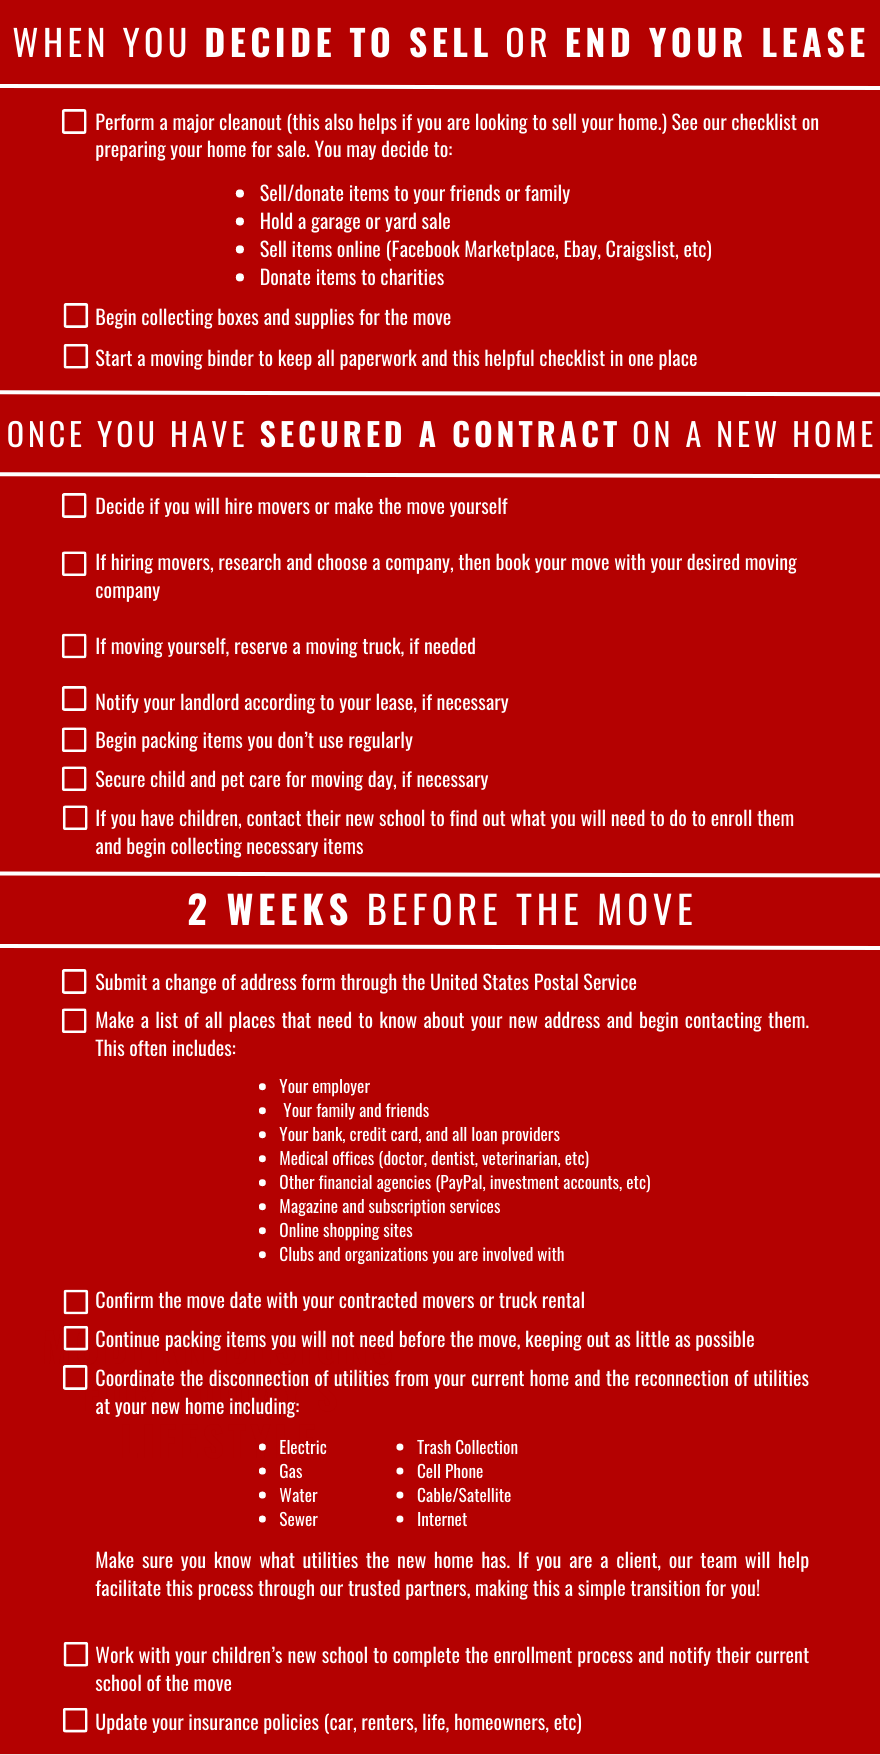 New Home Checklist: What You Need Before Moving In